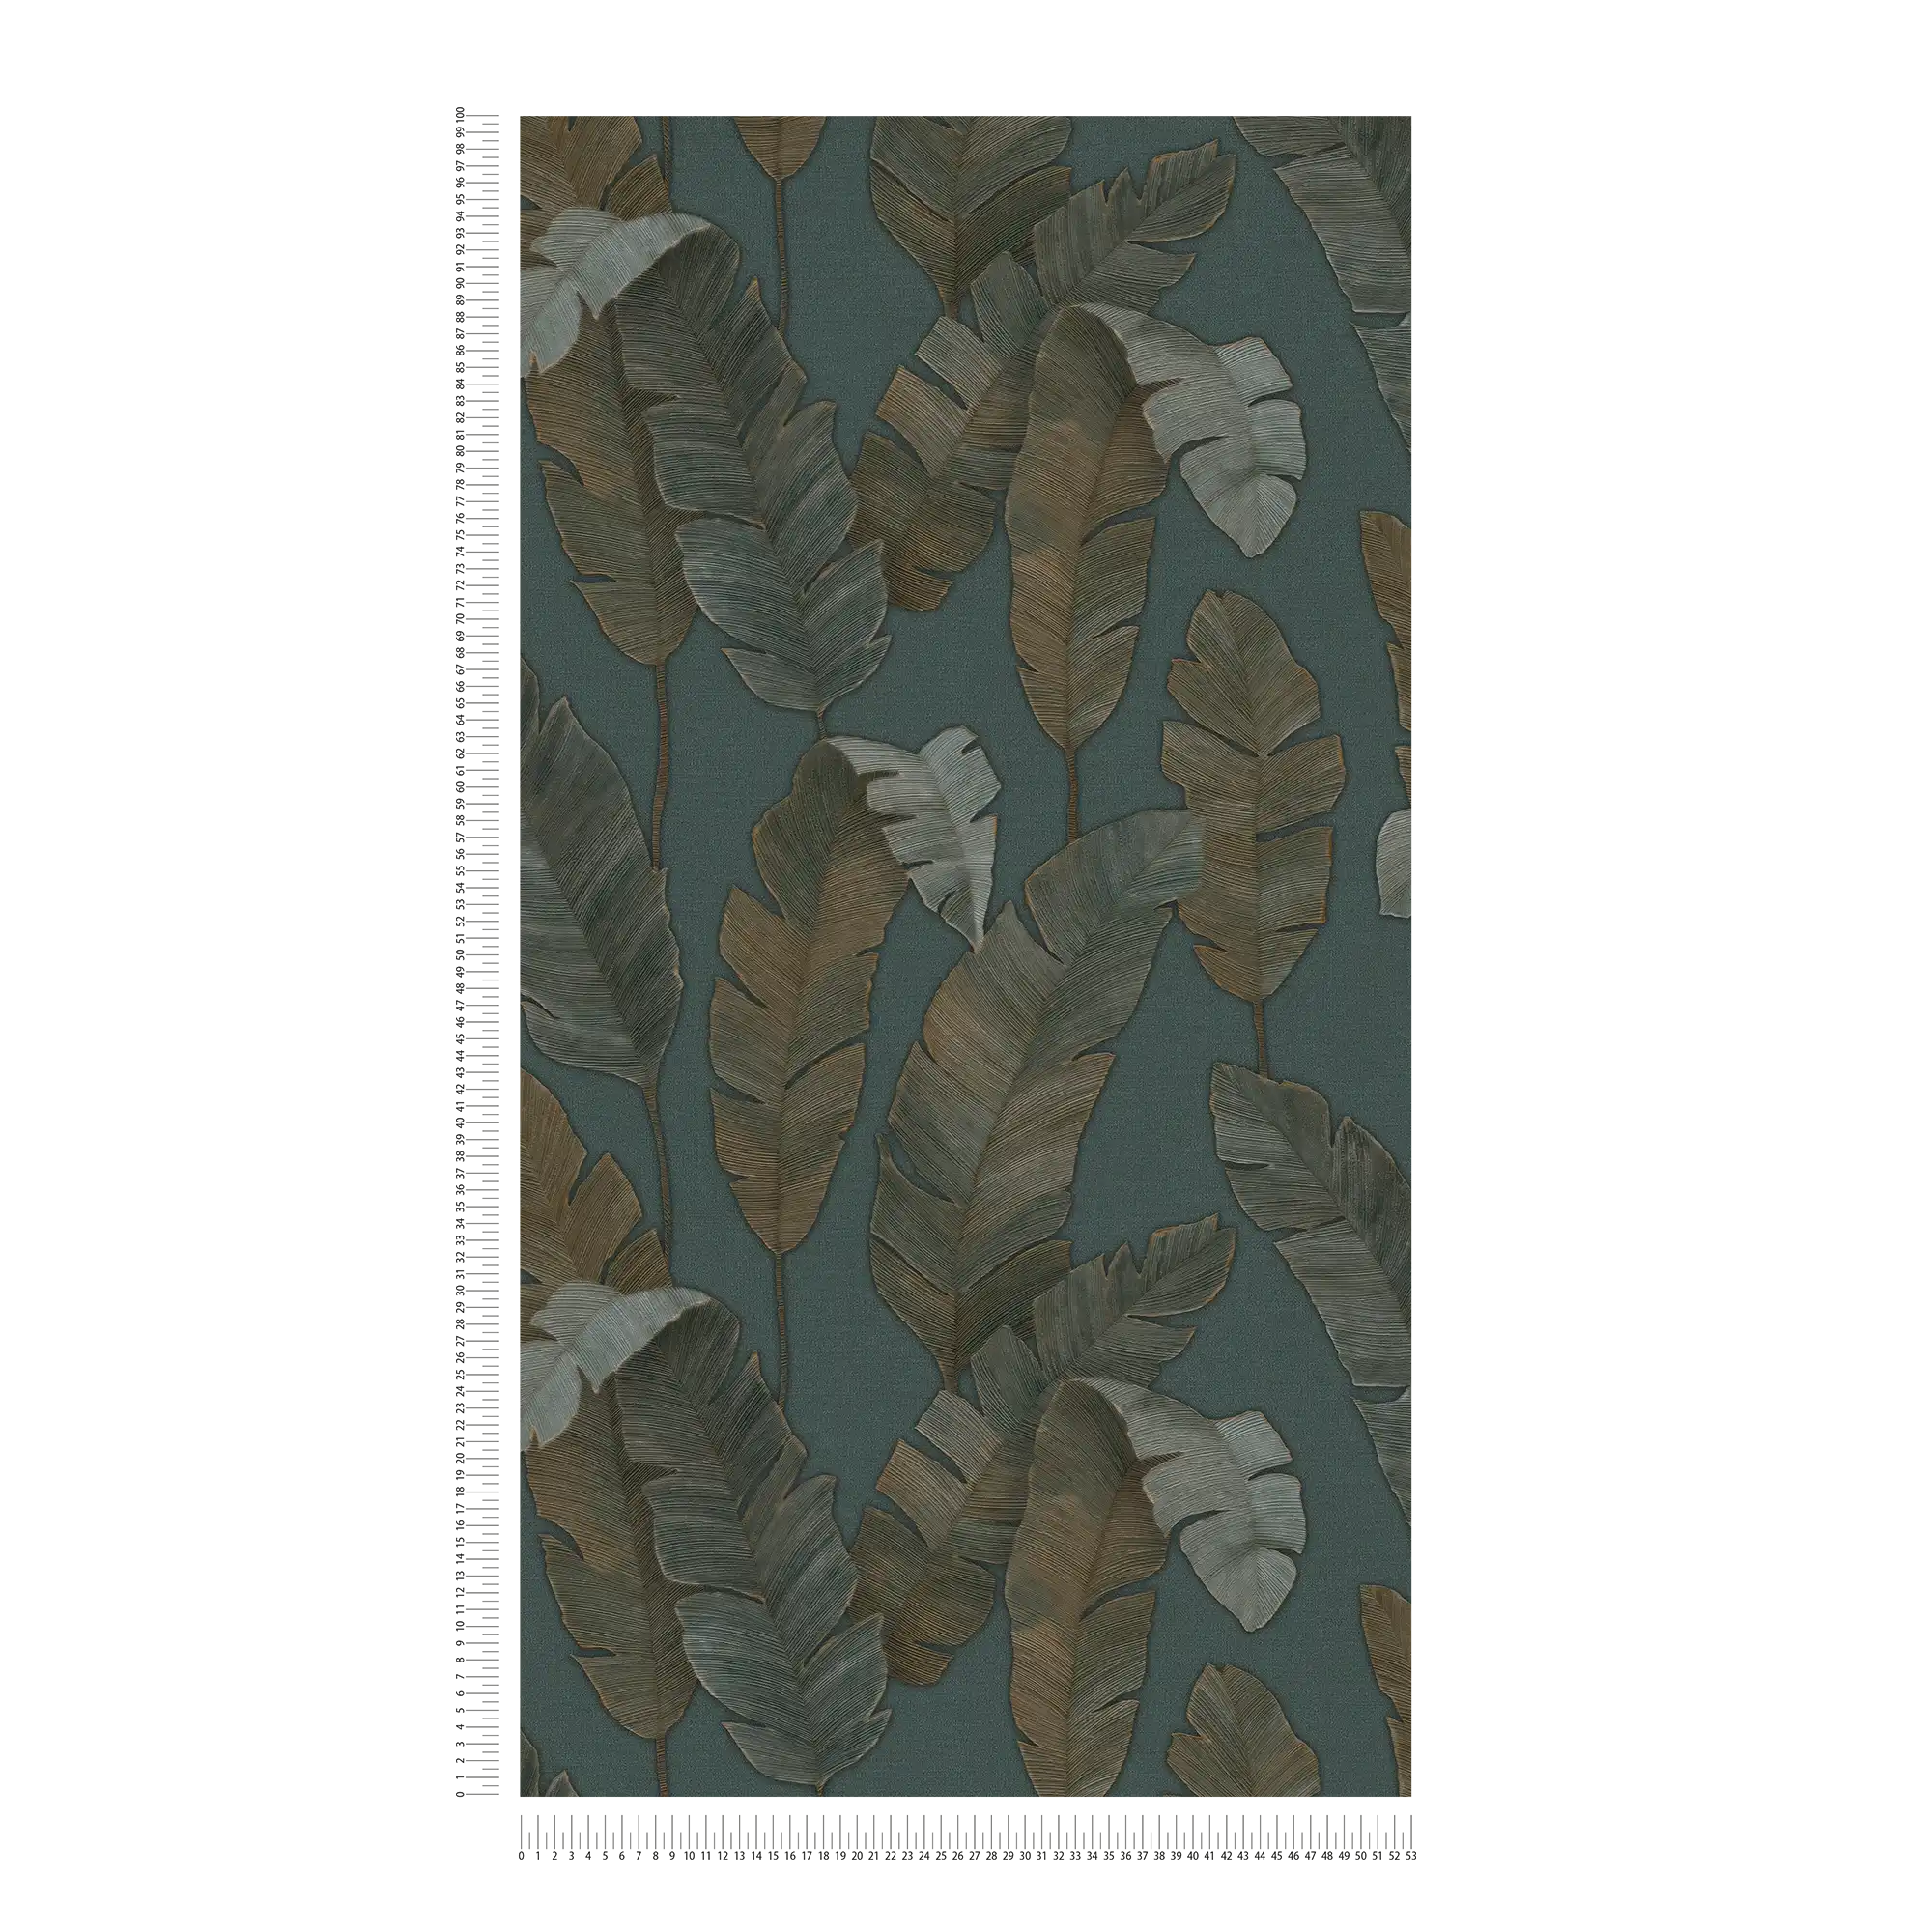             Non-woven wallpaper with large palm leaves in dark colour - petrol, green, brown
        